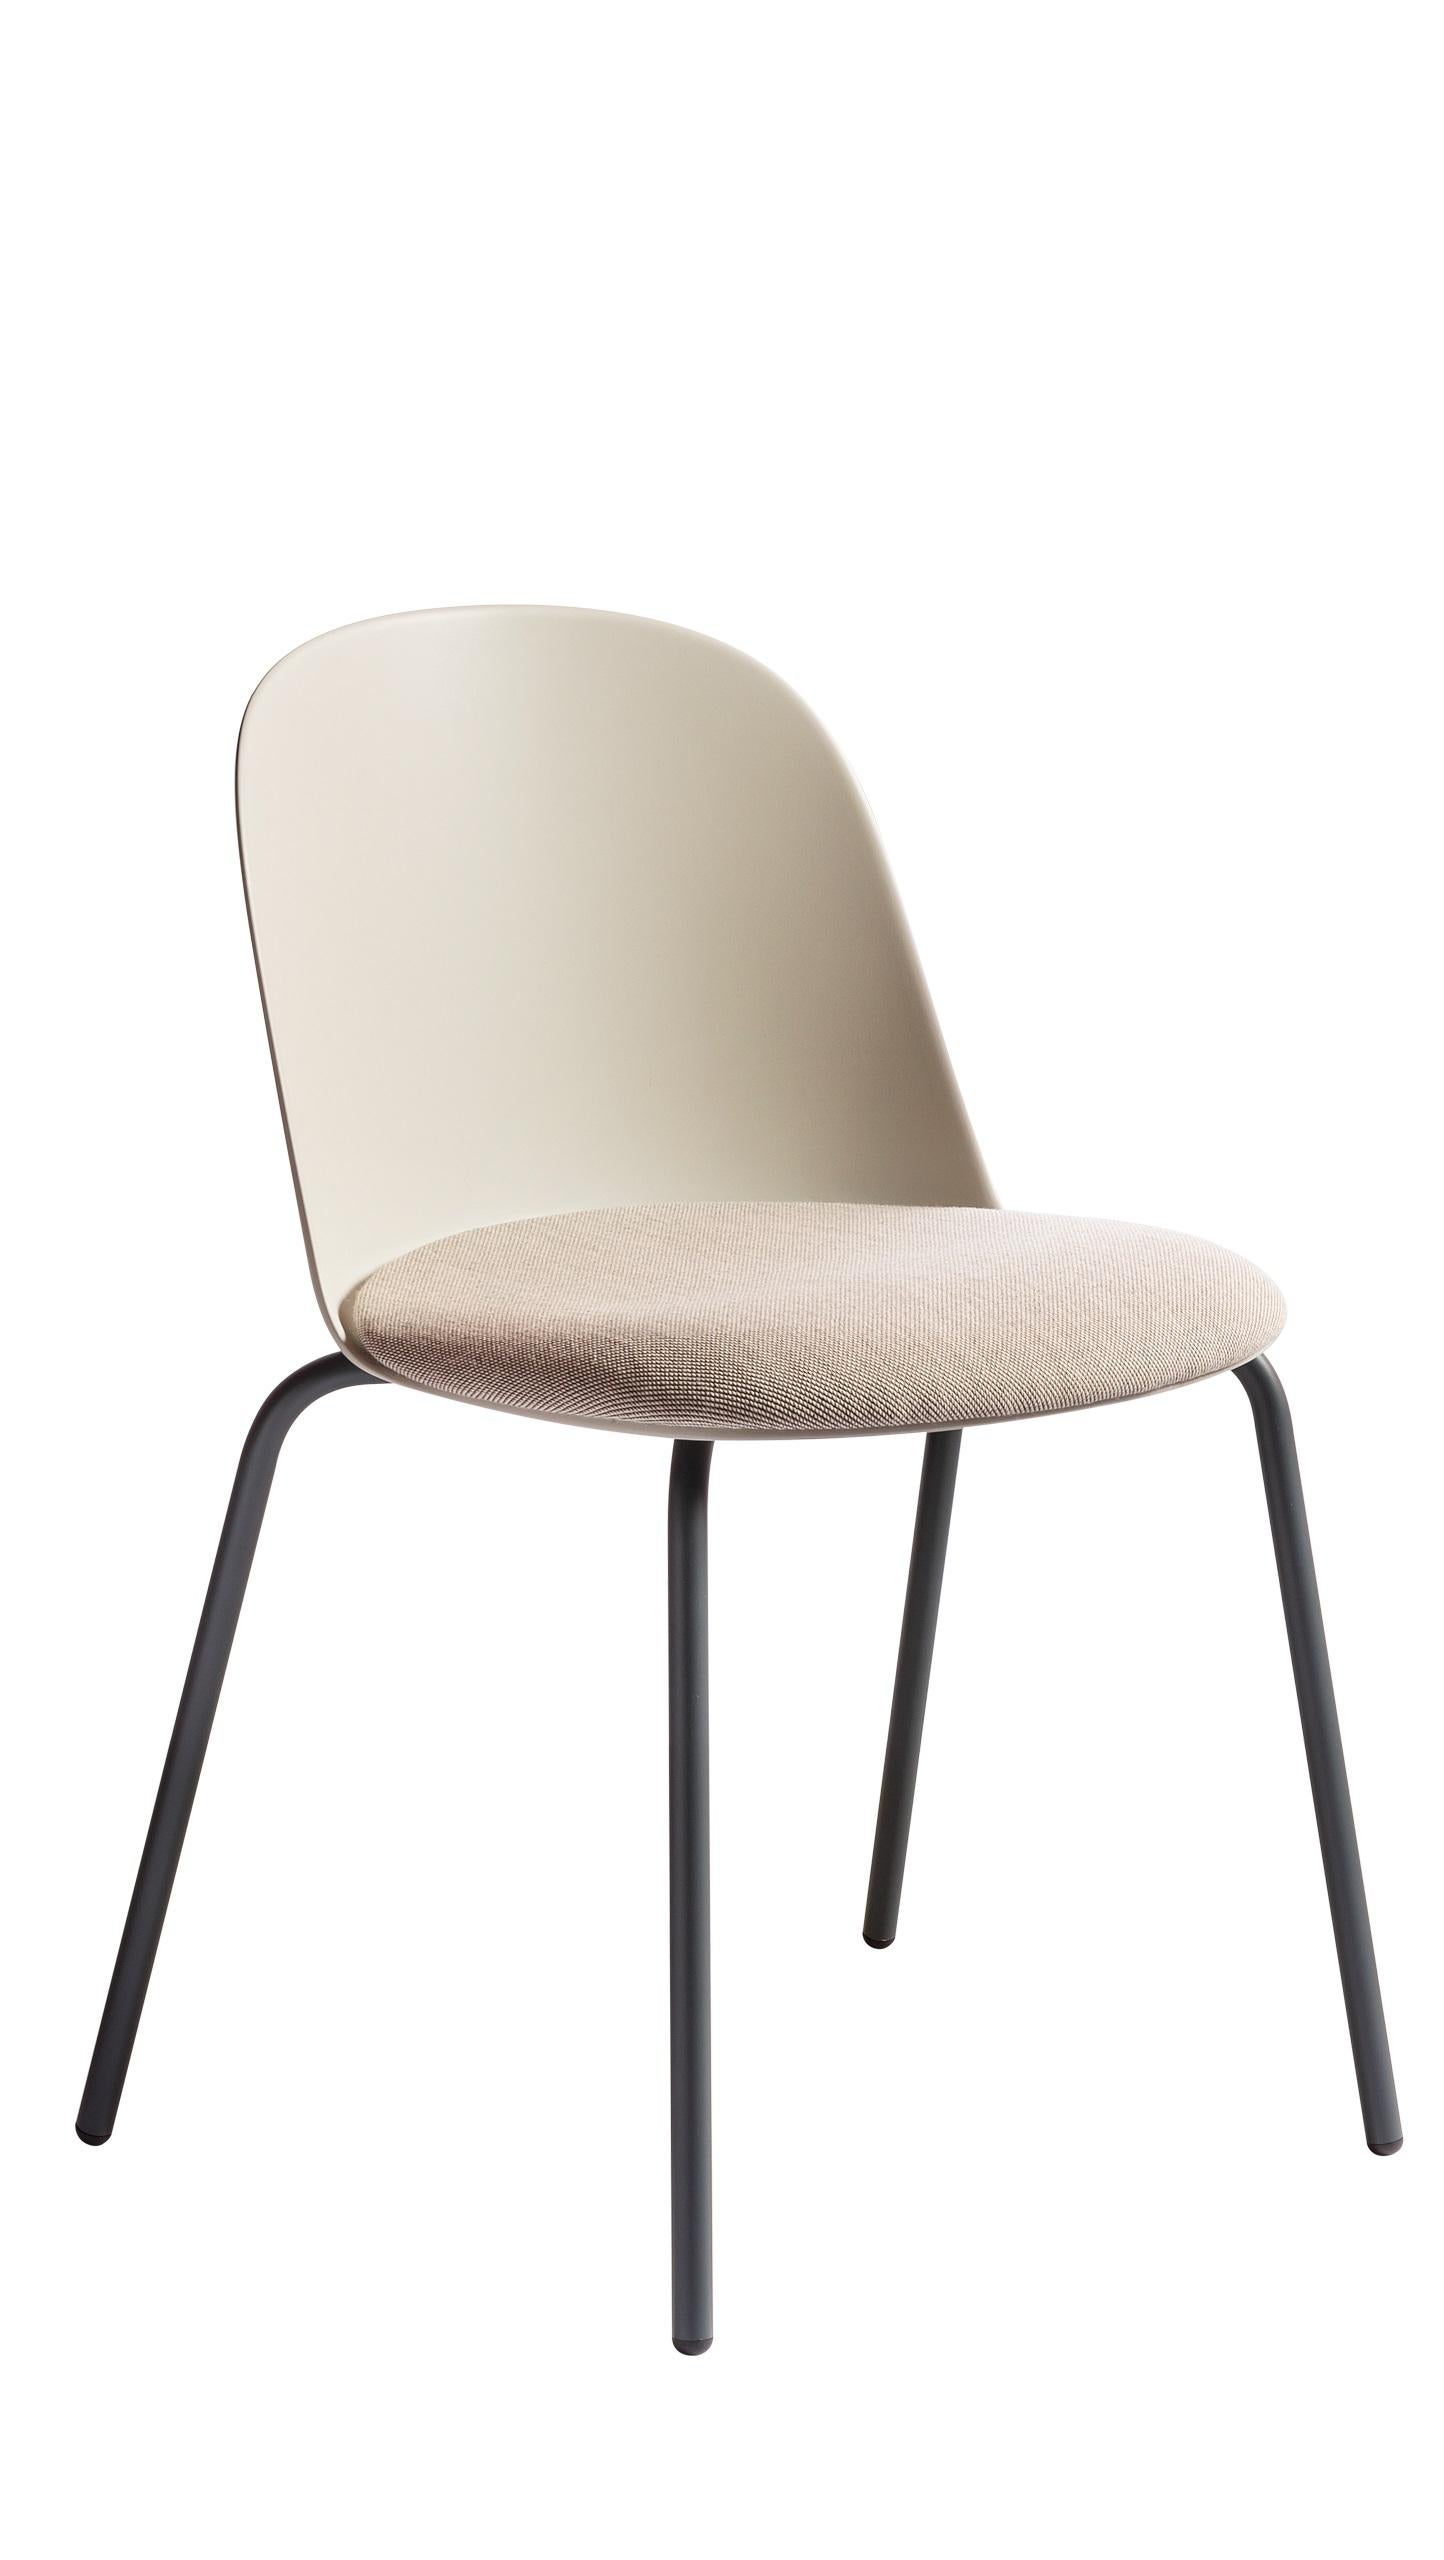 For Sale: Beige (Trame_ Beige) Mariolina Chair in Anthracite Metal Legs, Silk Gray Shell, by E-GGs 2